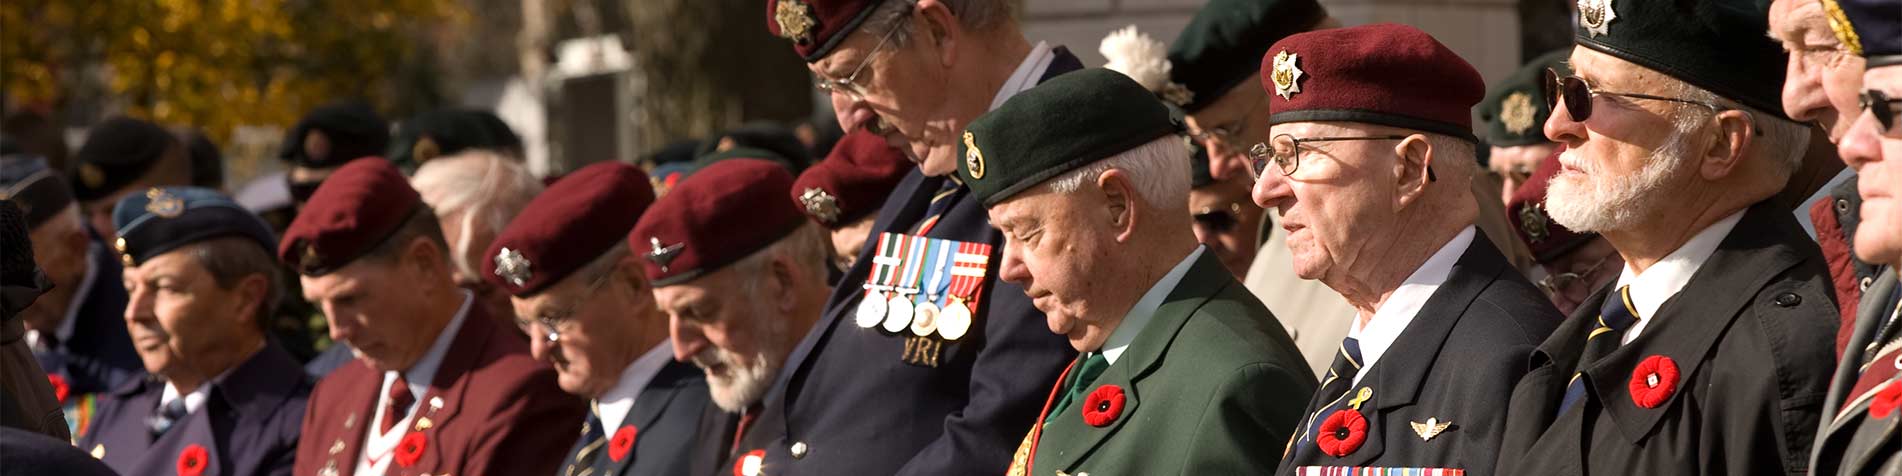 Remembrance-Day-blog